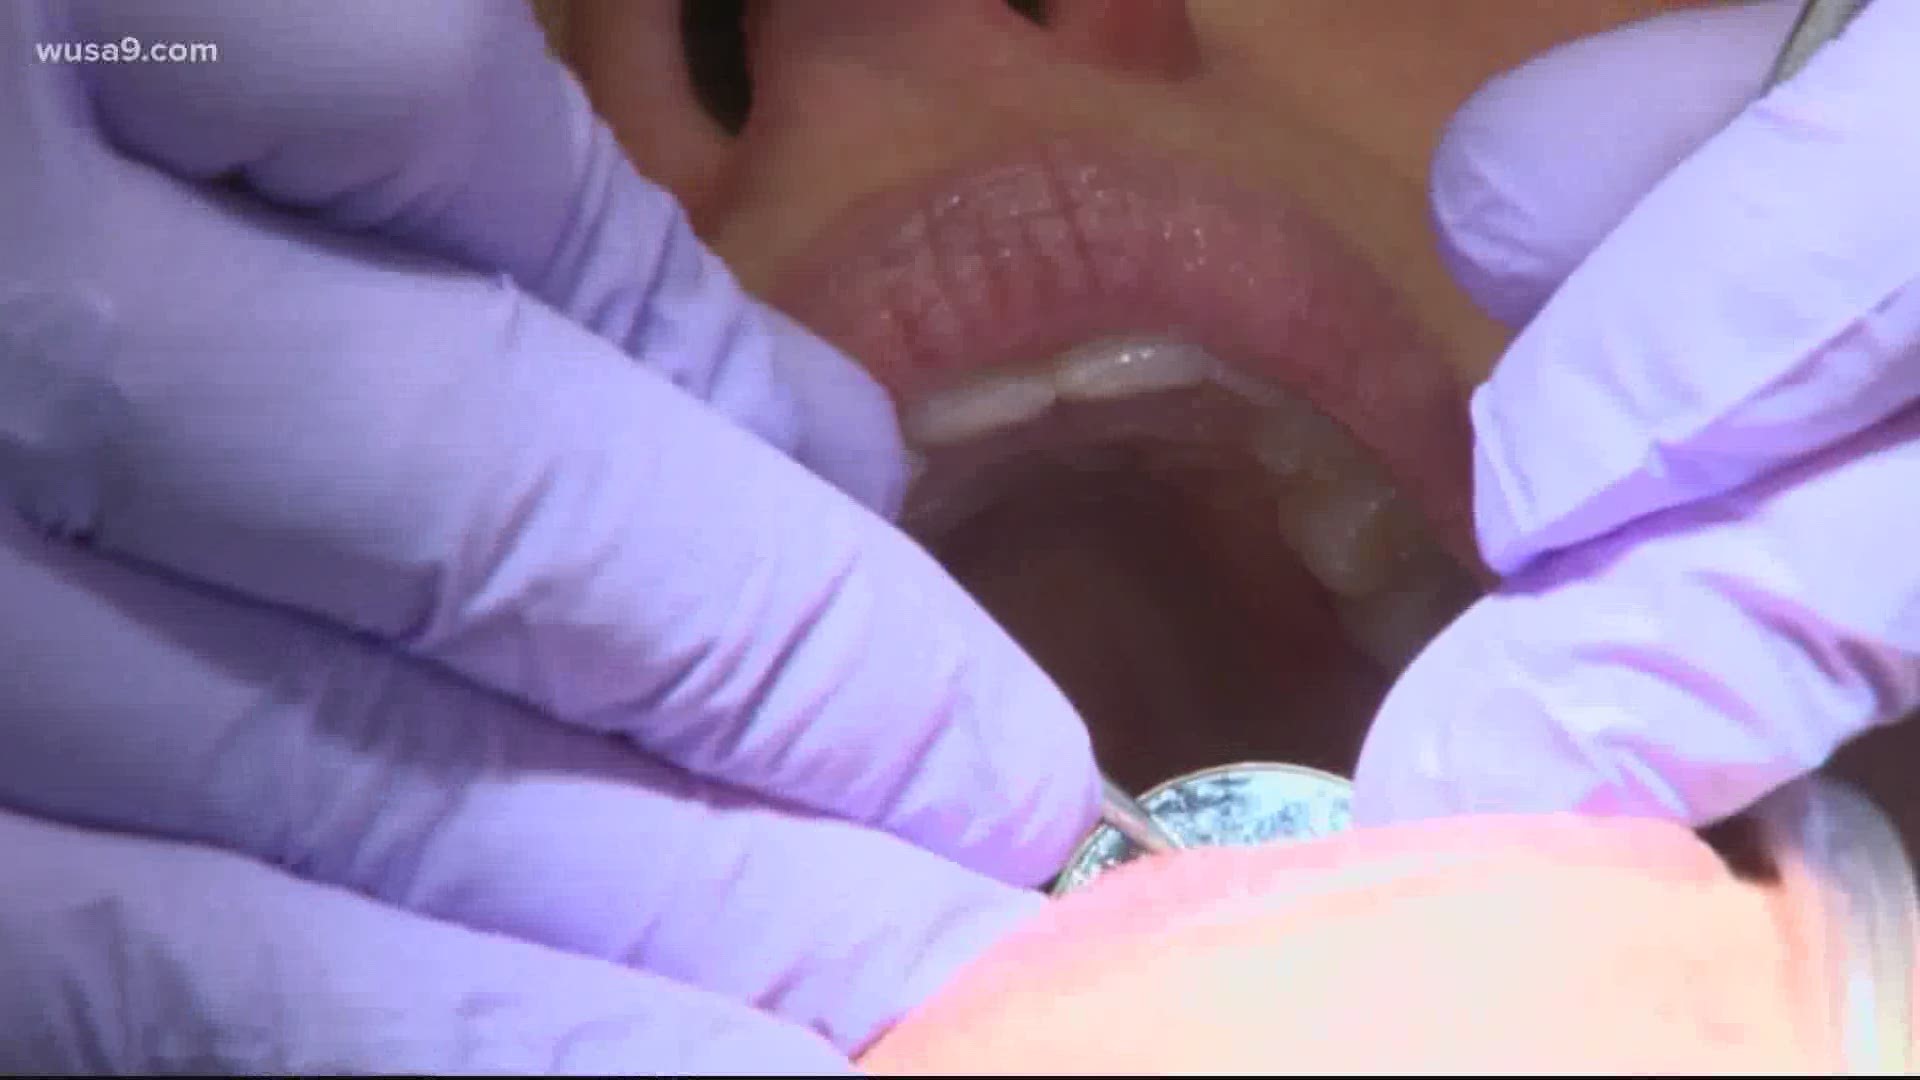 Dental practices are facing a lot of uncertainty, even while some are allowed to reopen